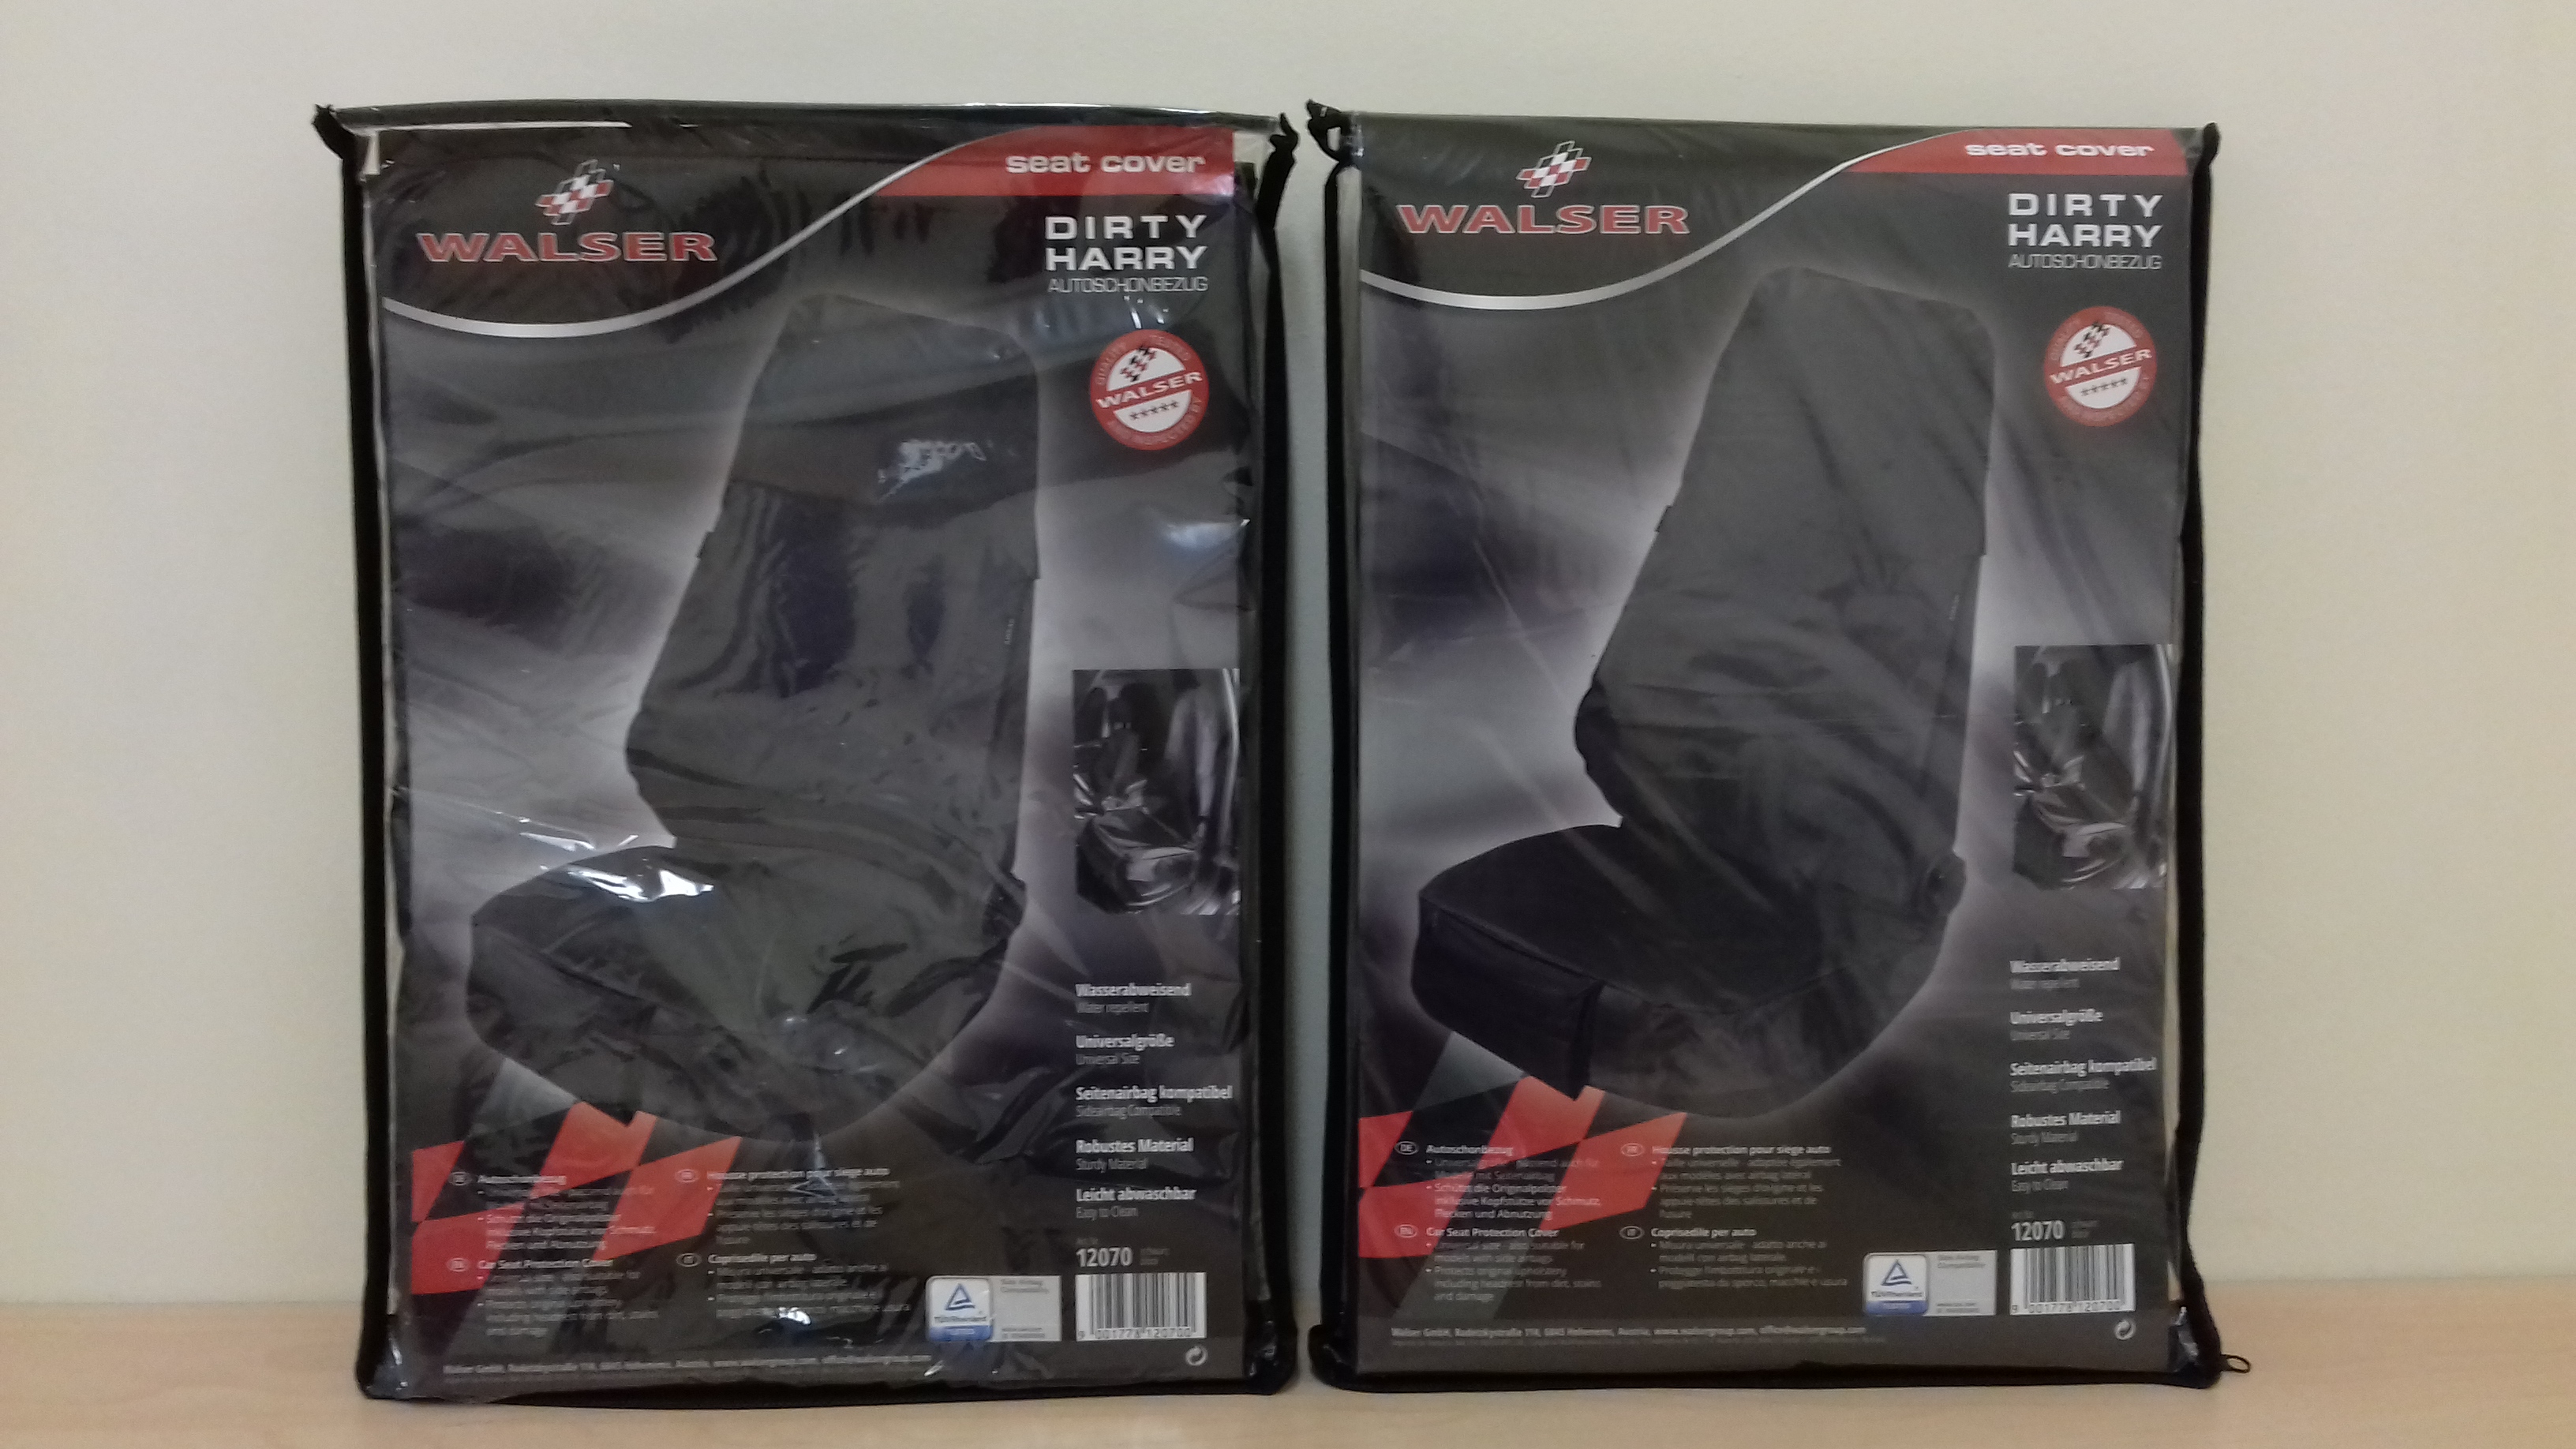 UNIVERSAL SEAT COVER (DIRTY HARRY) | Kilkenny Truck Centre